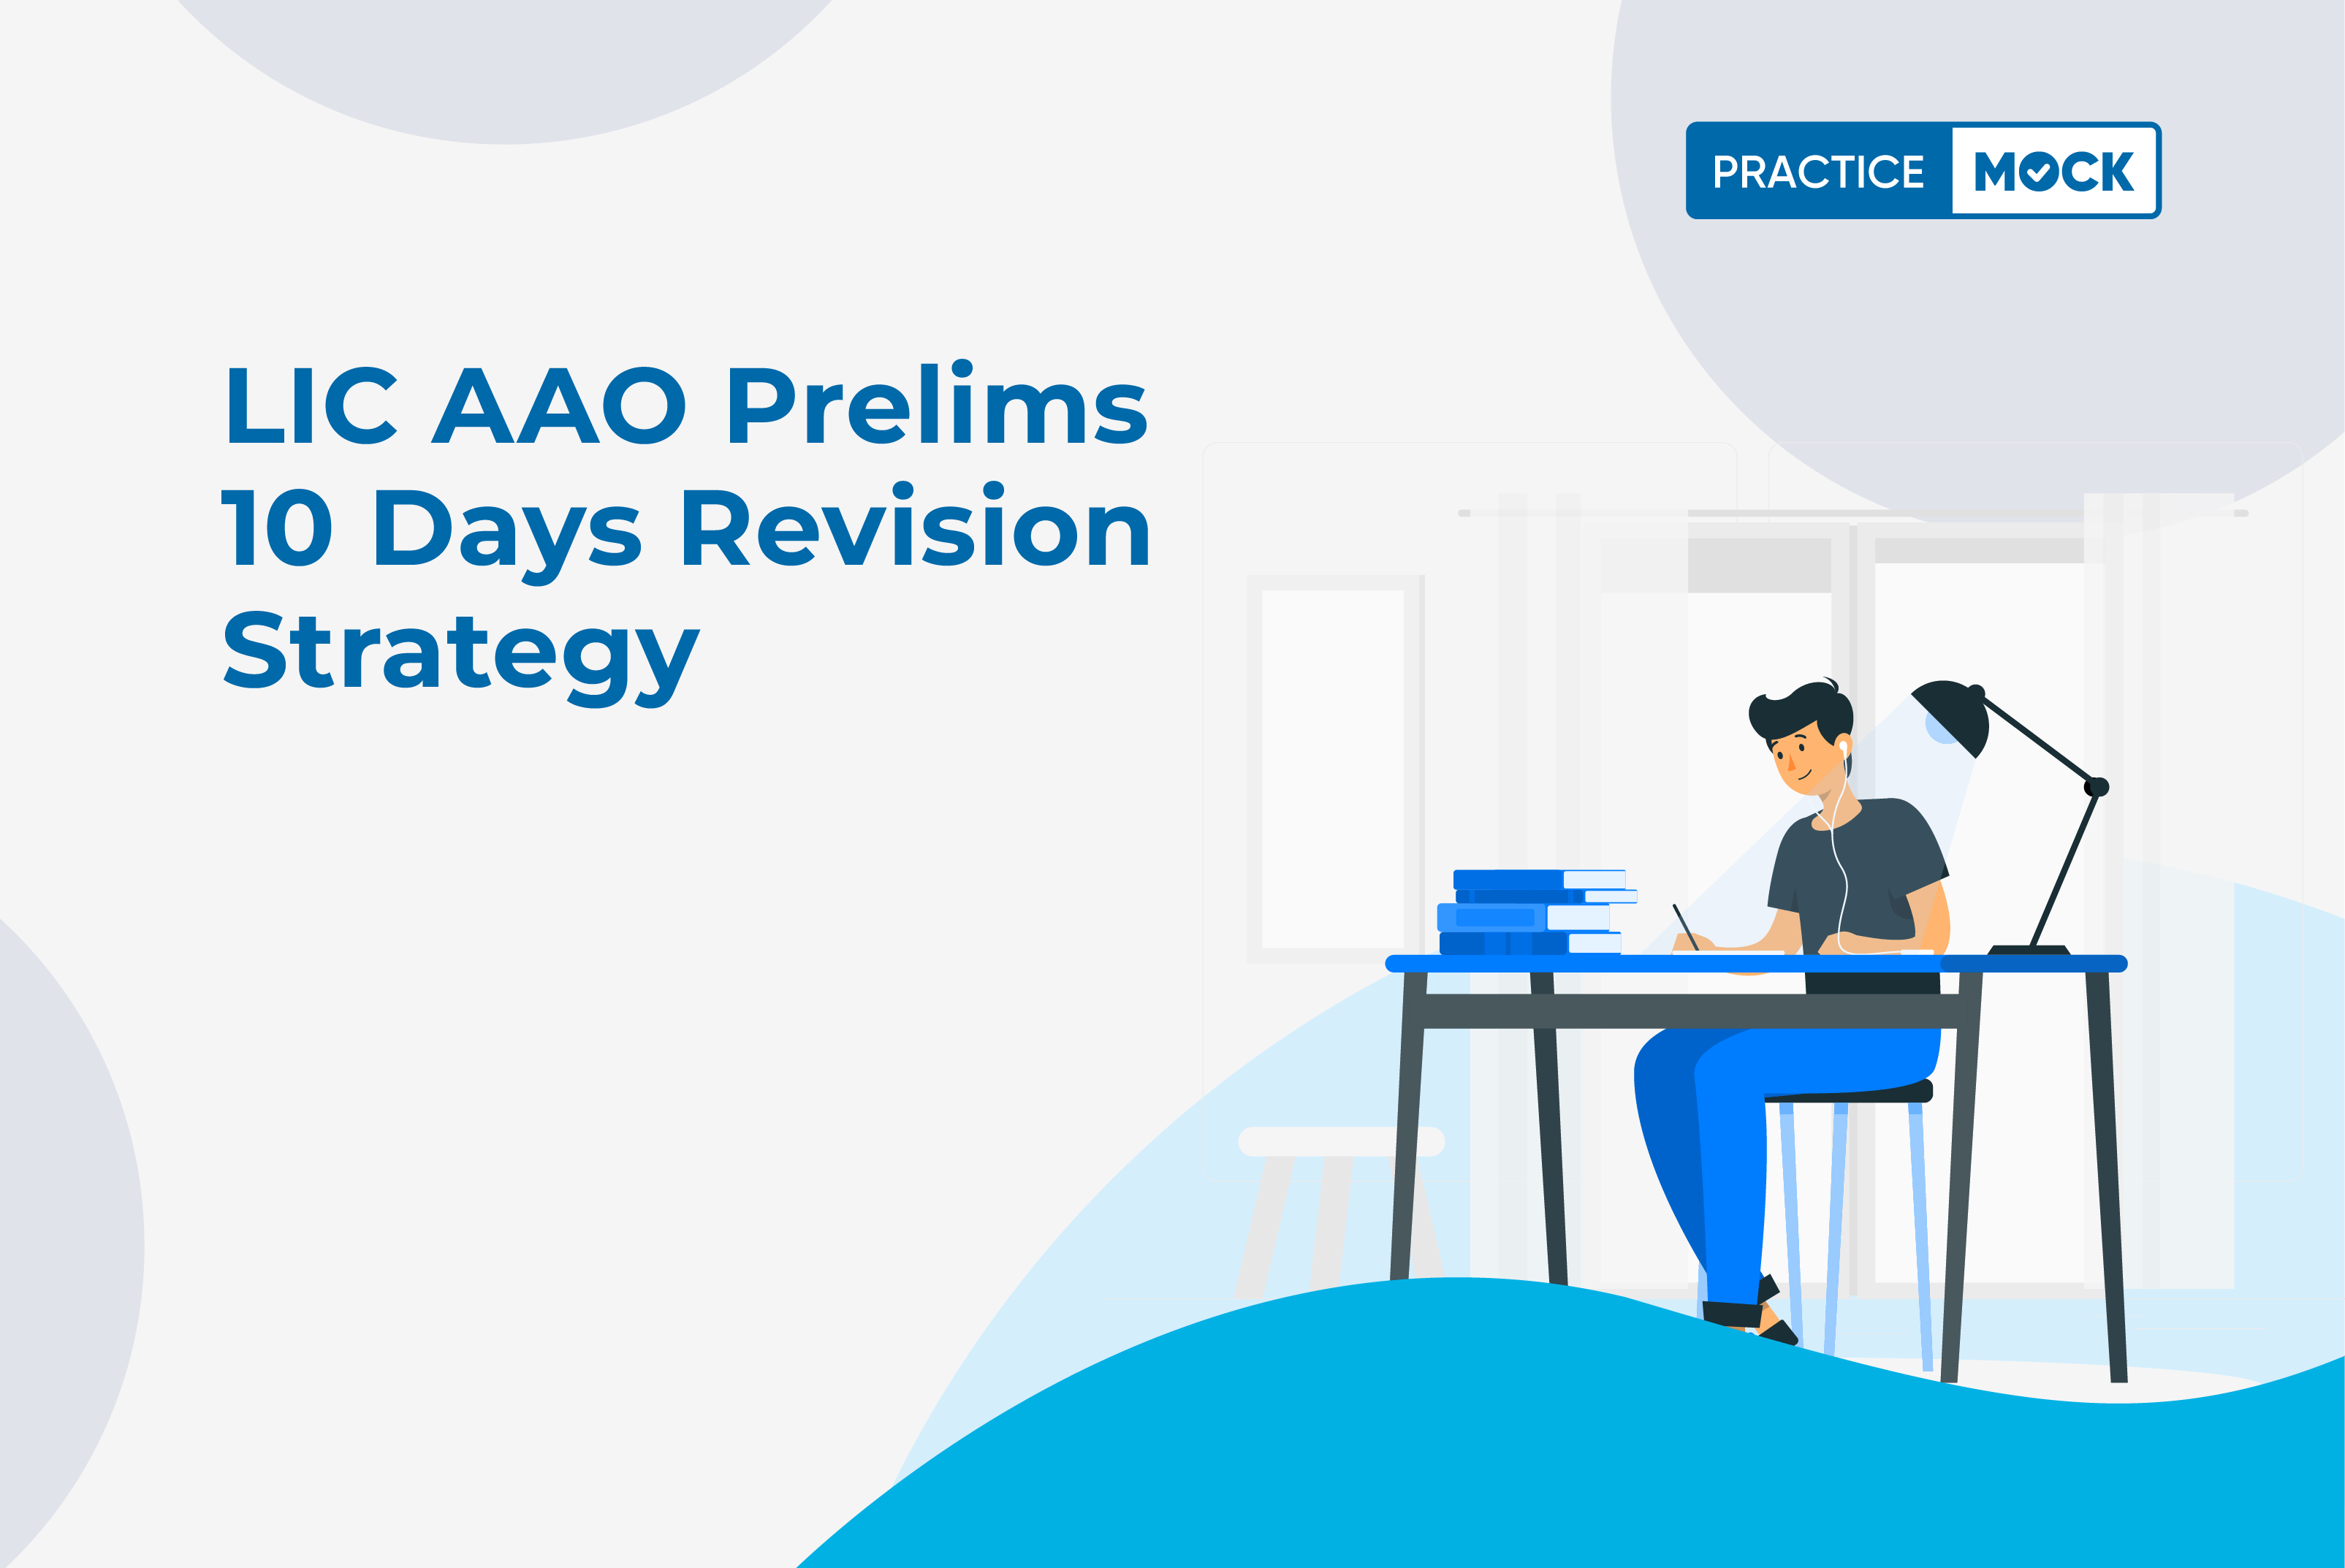 LIC AAO Prelims 10 Days Revision Strategy